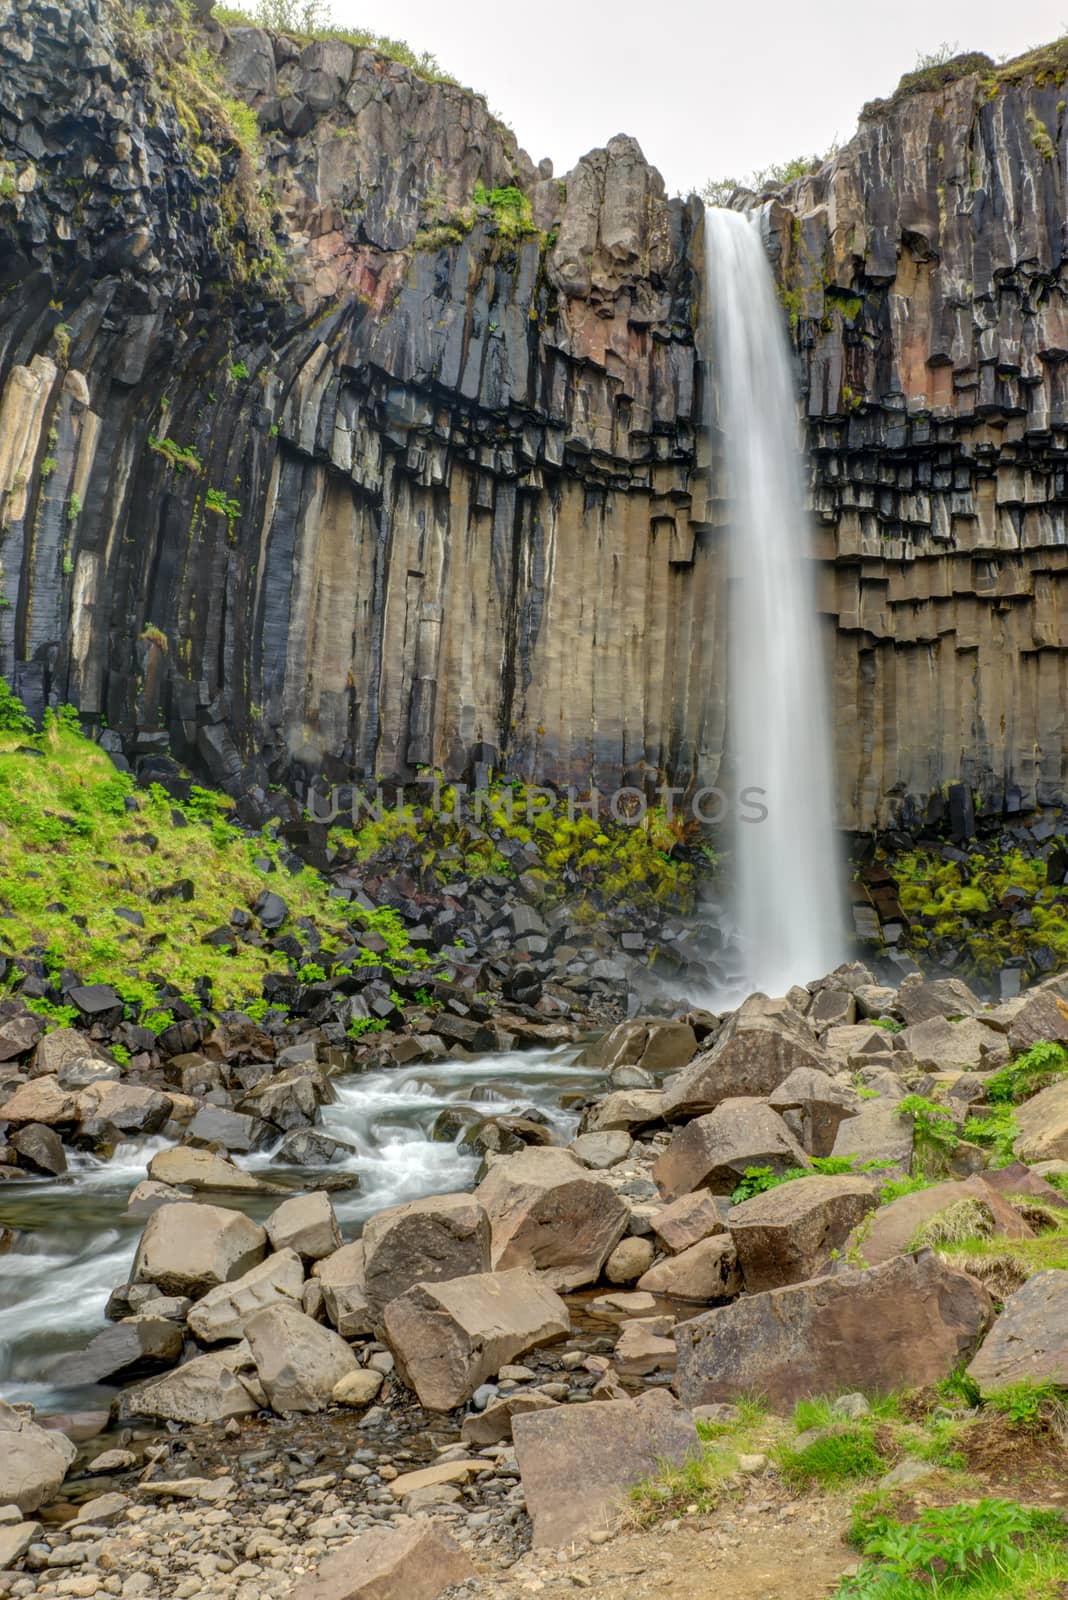 The famous Svartifoss waterfall in southern Iceland